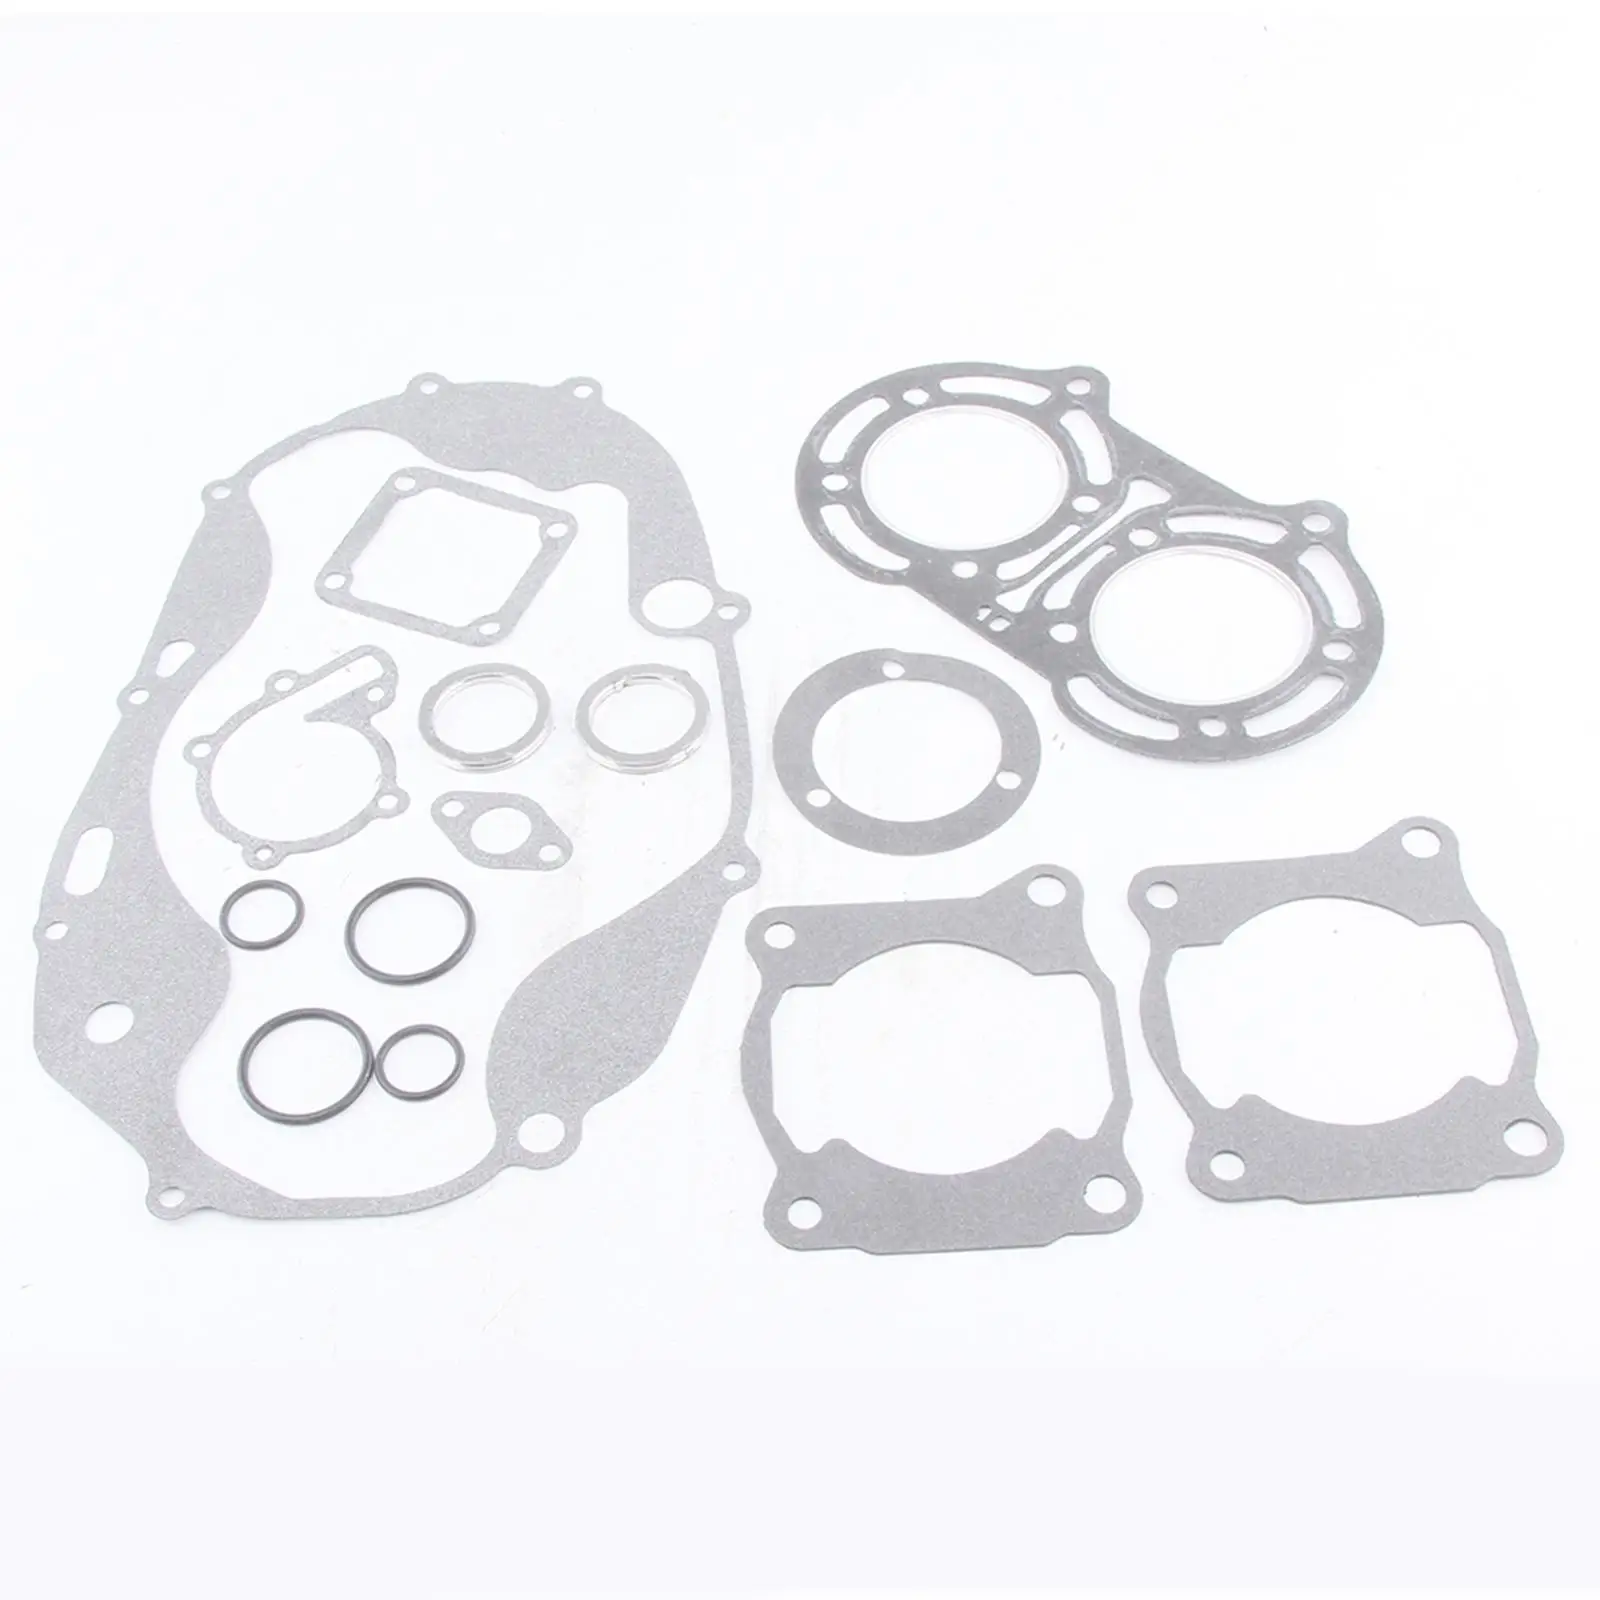 New Replacement   Engine Gasket, Full Set, for  ATV